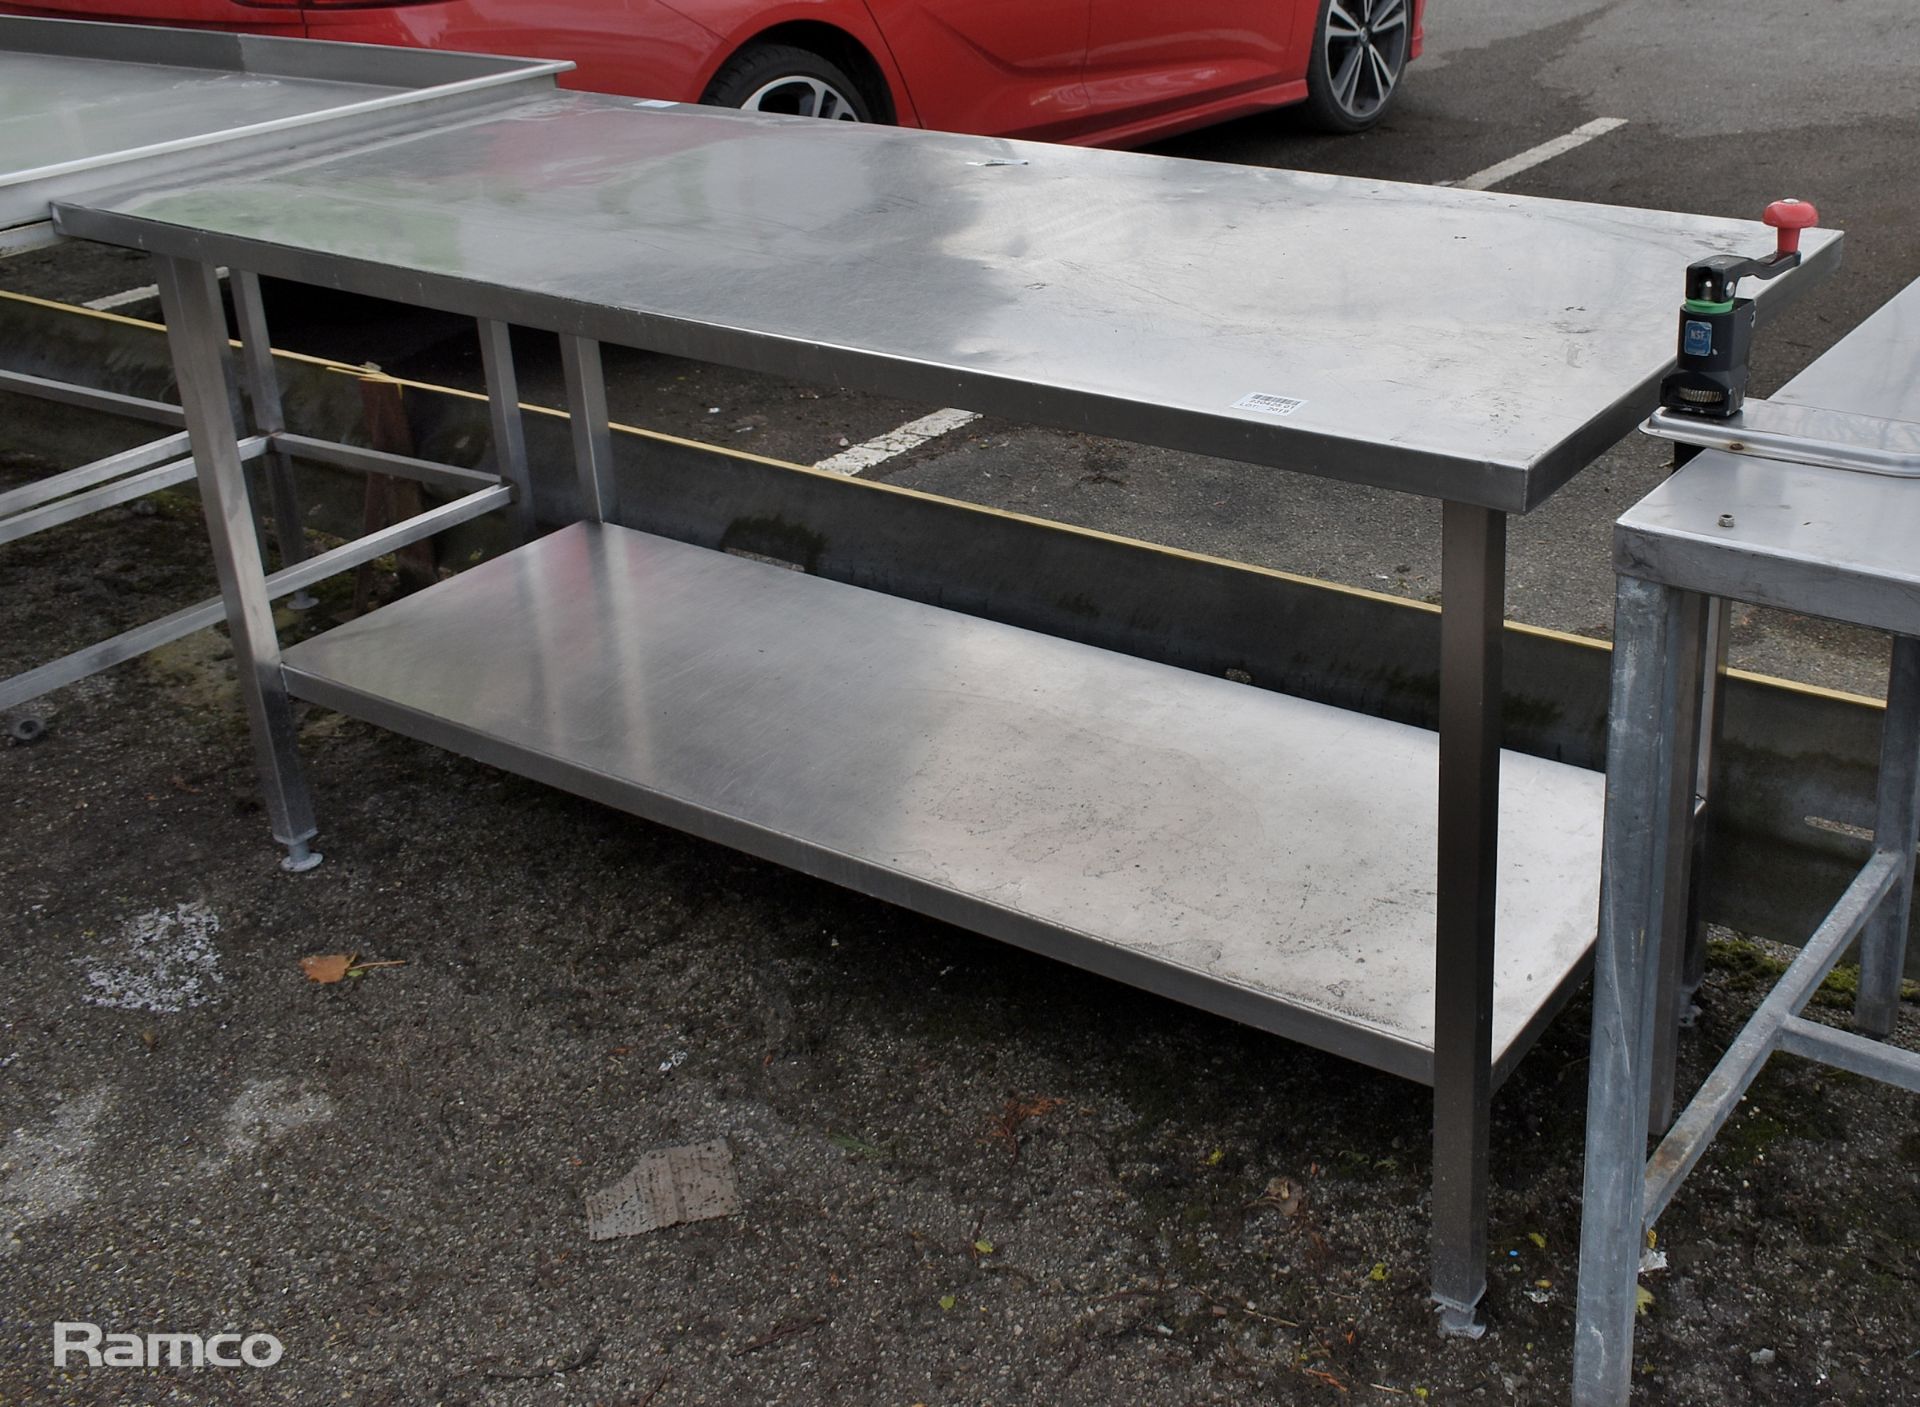 Stainless steel table with bottom shelf - L 180 x W 75 x H 88cm - Image 3 of 3